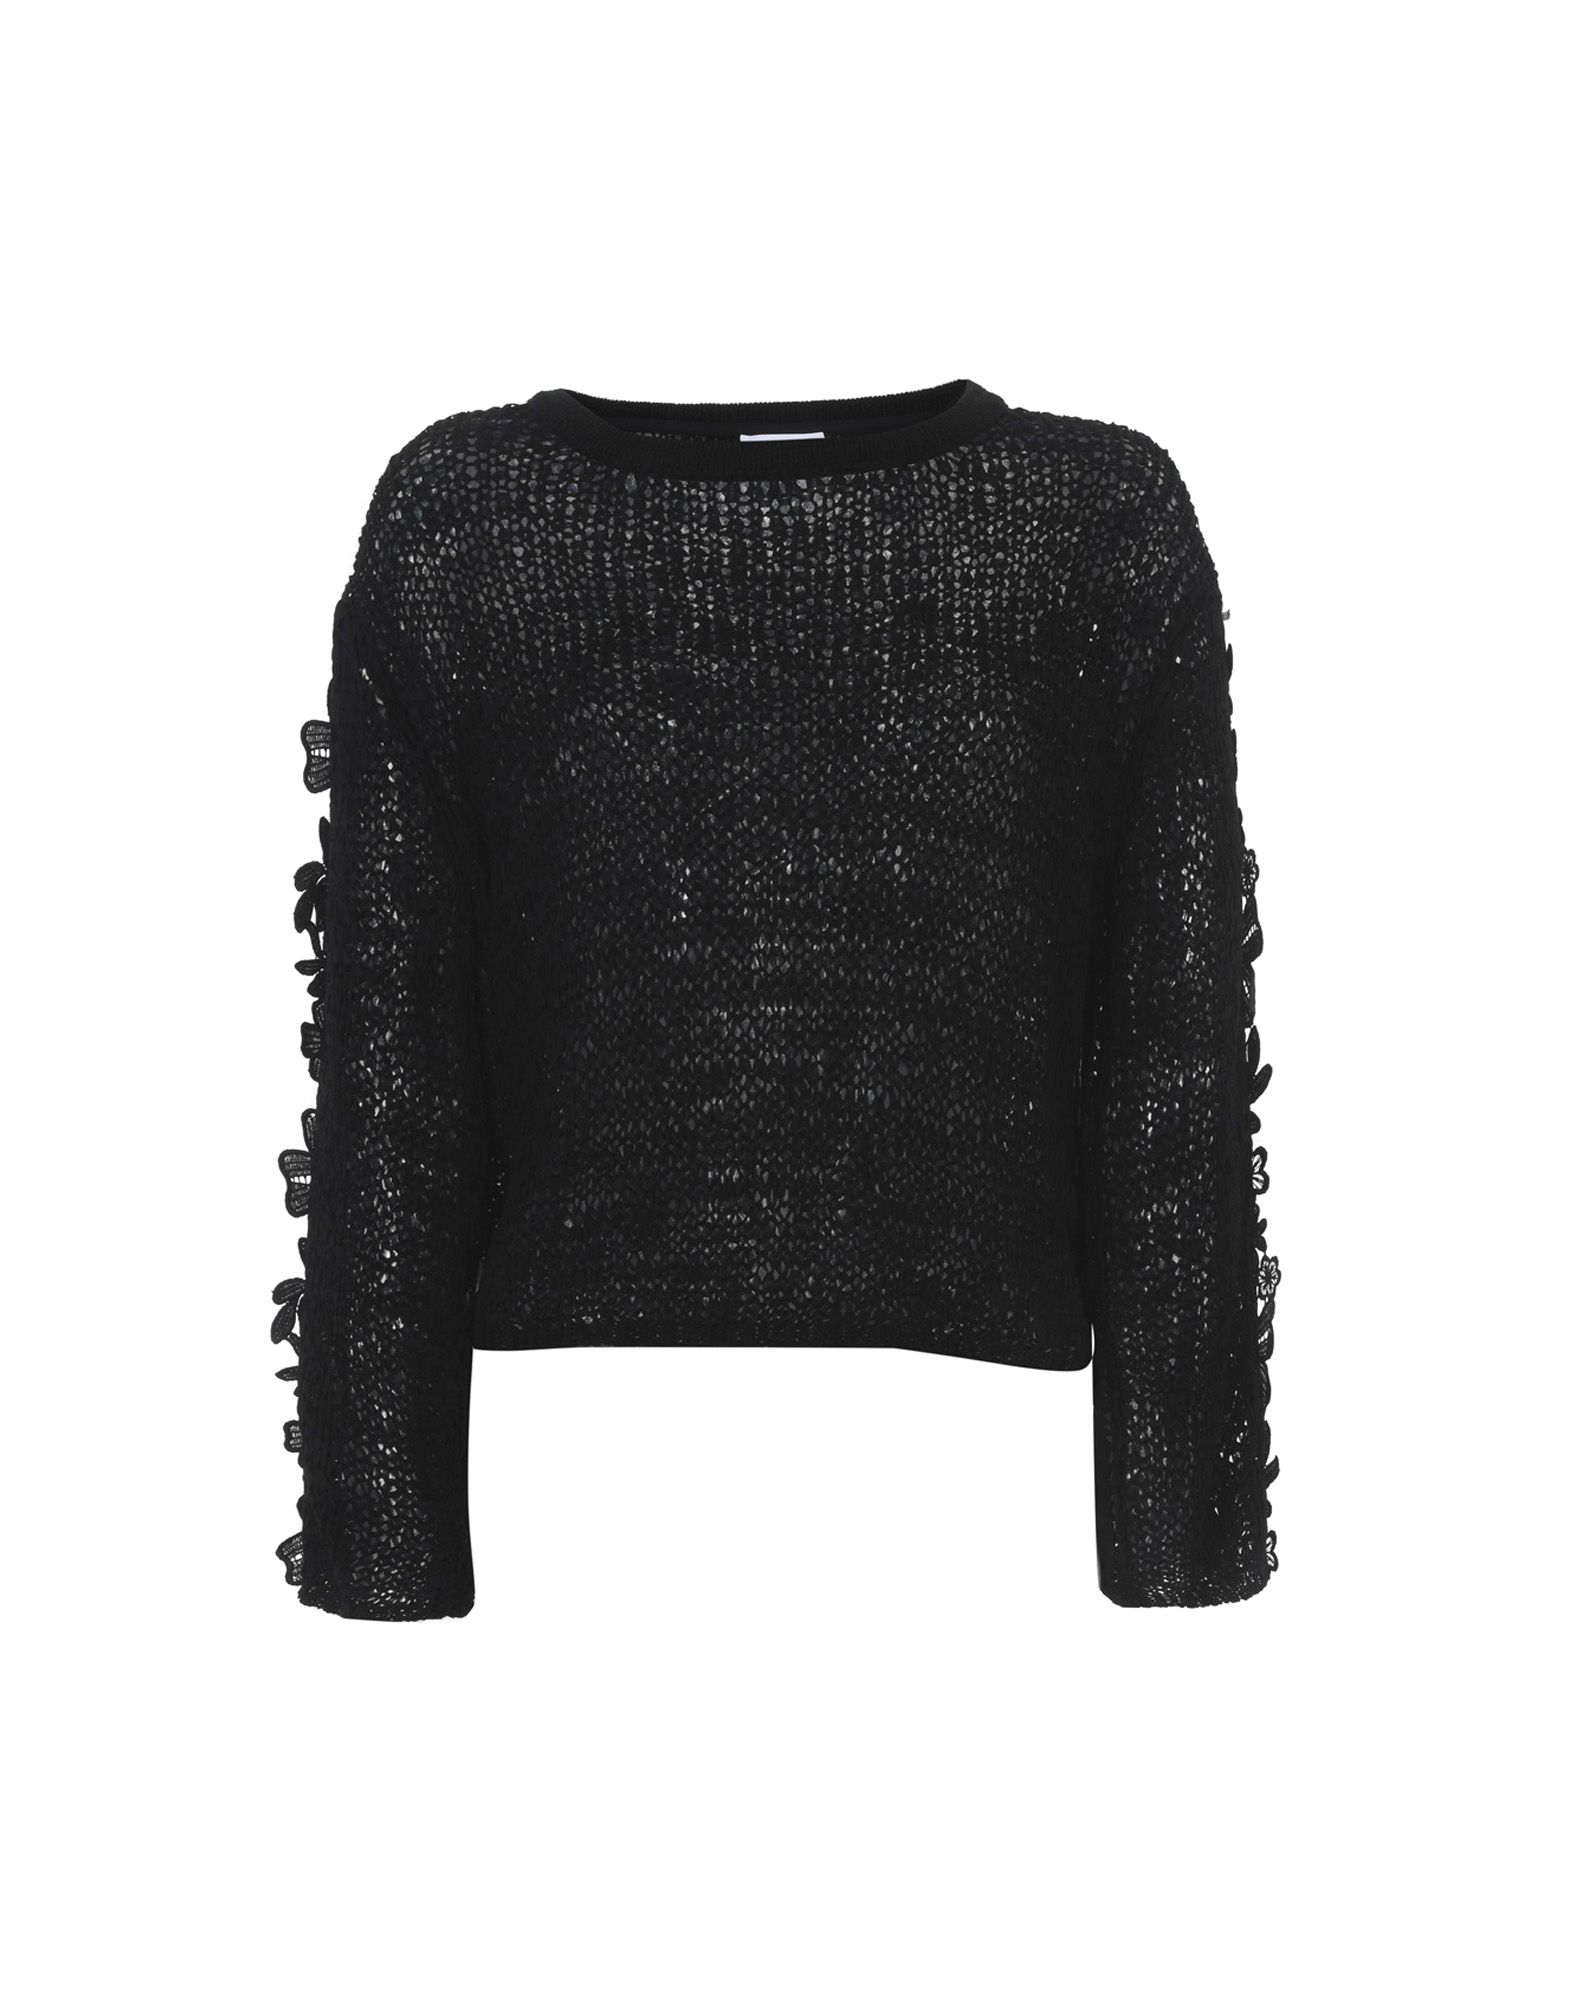 SEE BY CHLOÉ SWEATERS,39857292PV 4